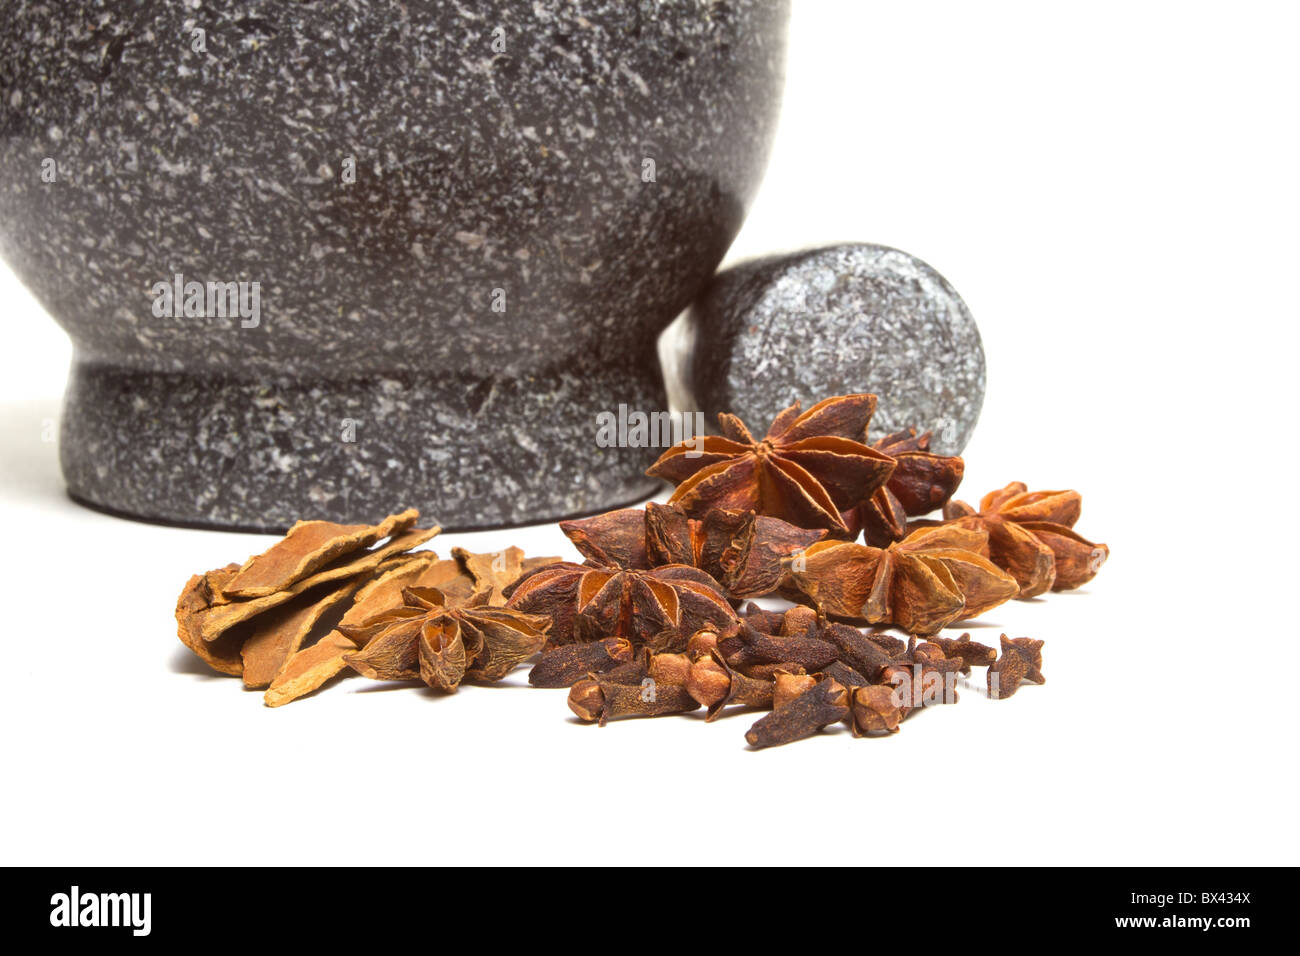 Granite mortar and pestle with winter spices of Cinnamon, cloves and Star Anise Stock Photo